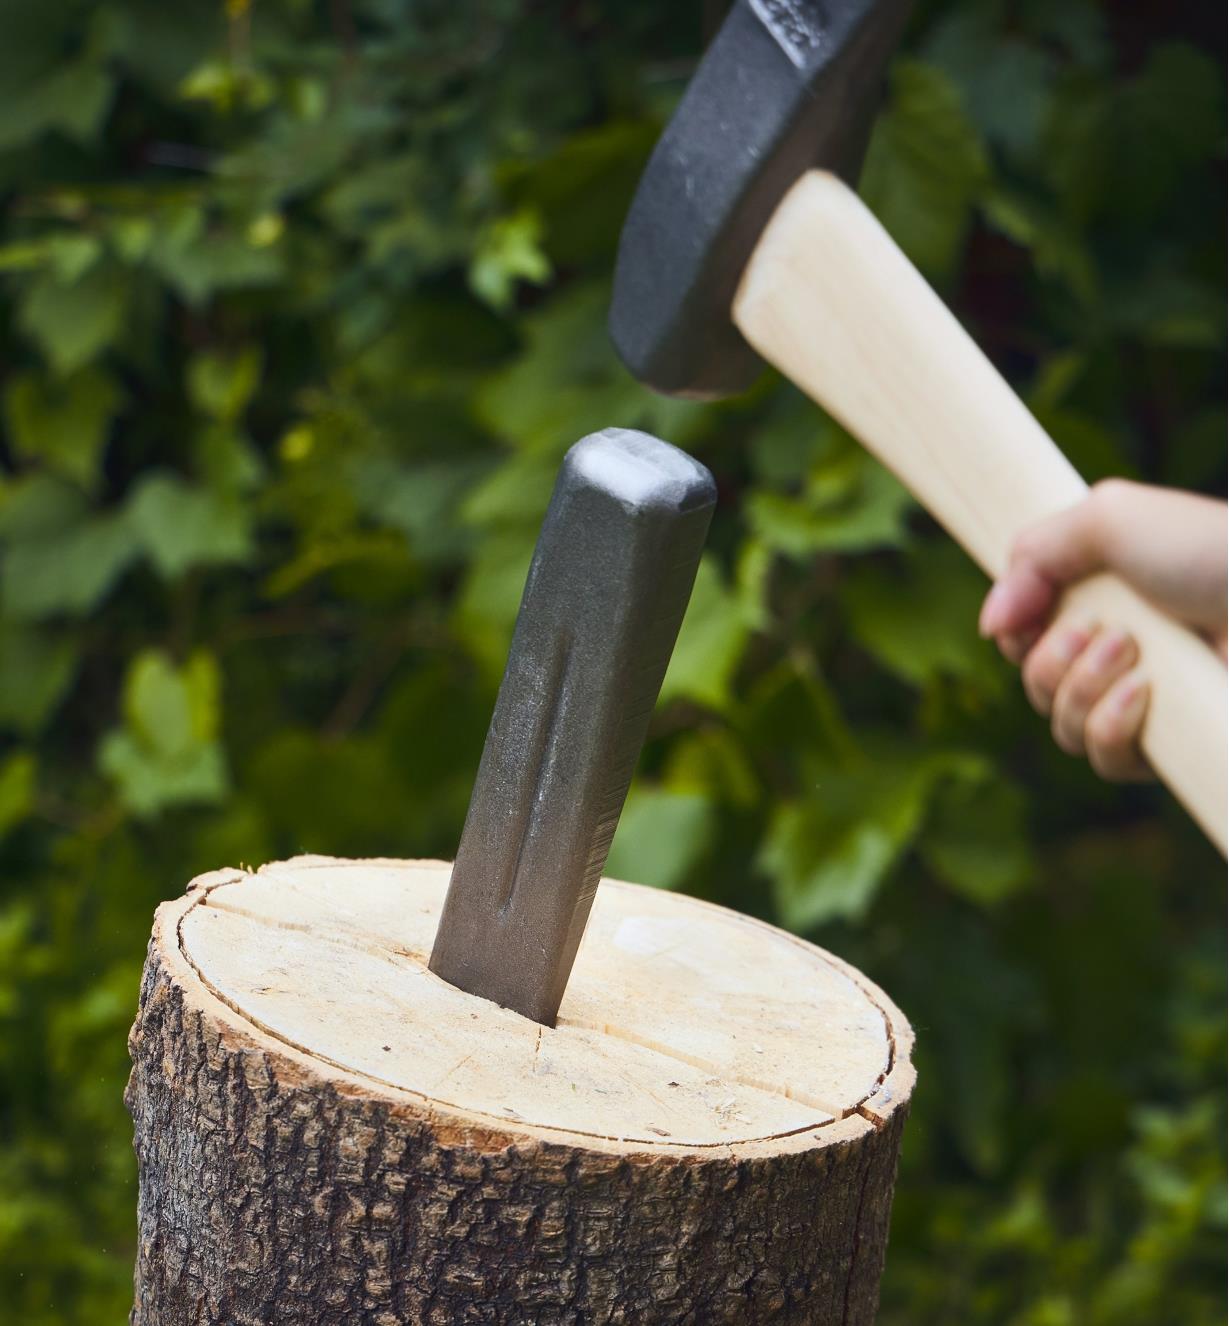 A square head wedge being used to split a round of wood